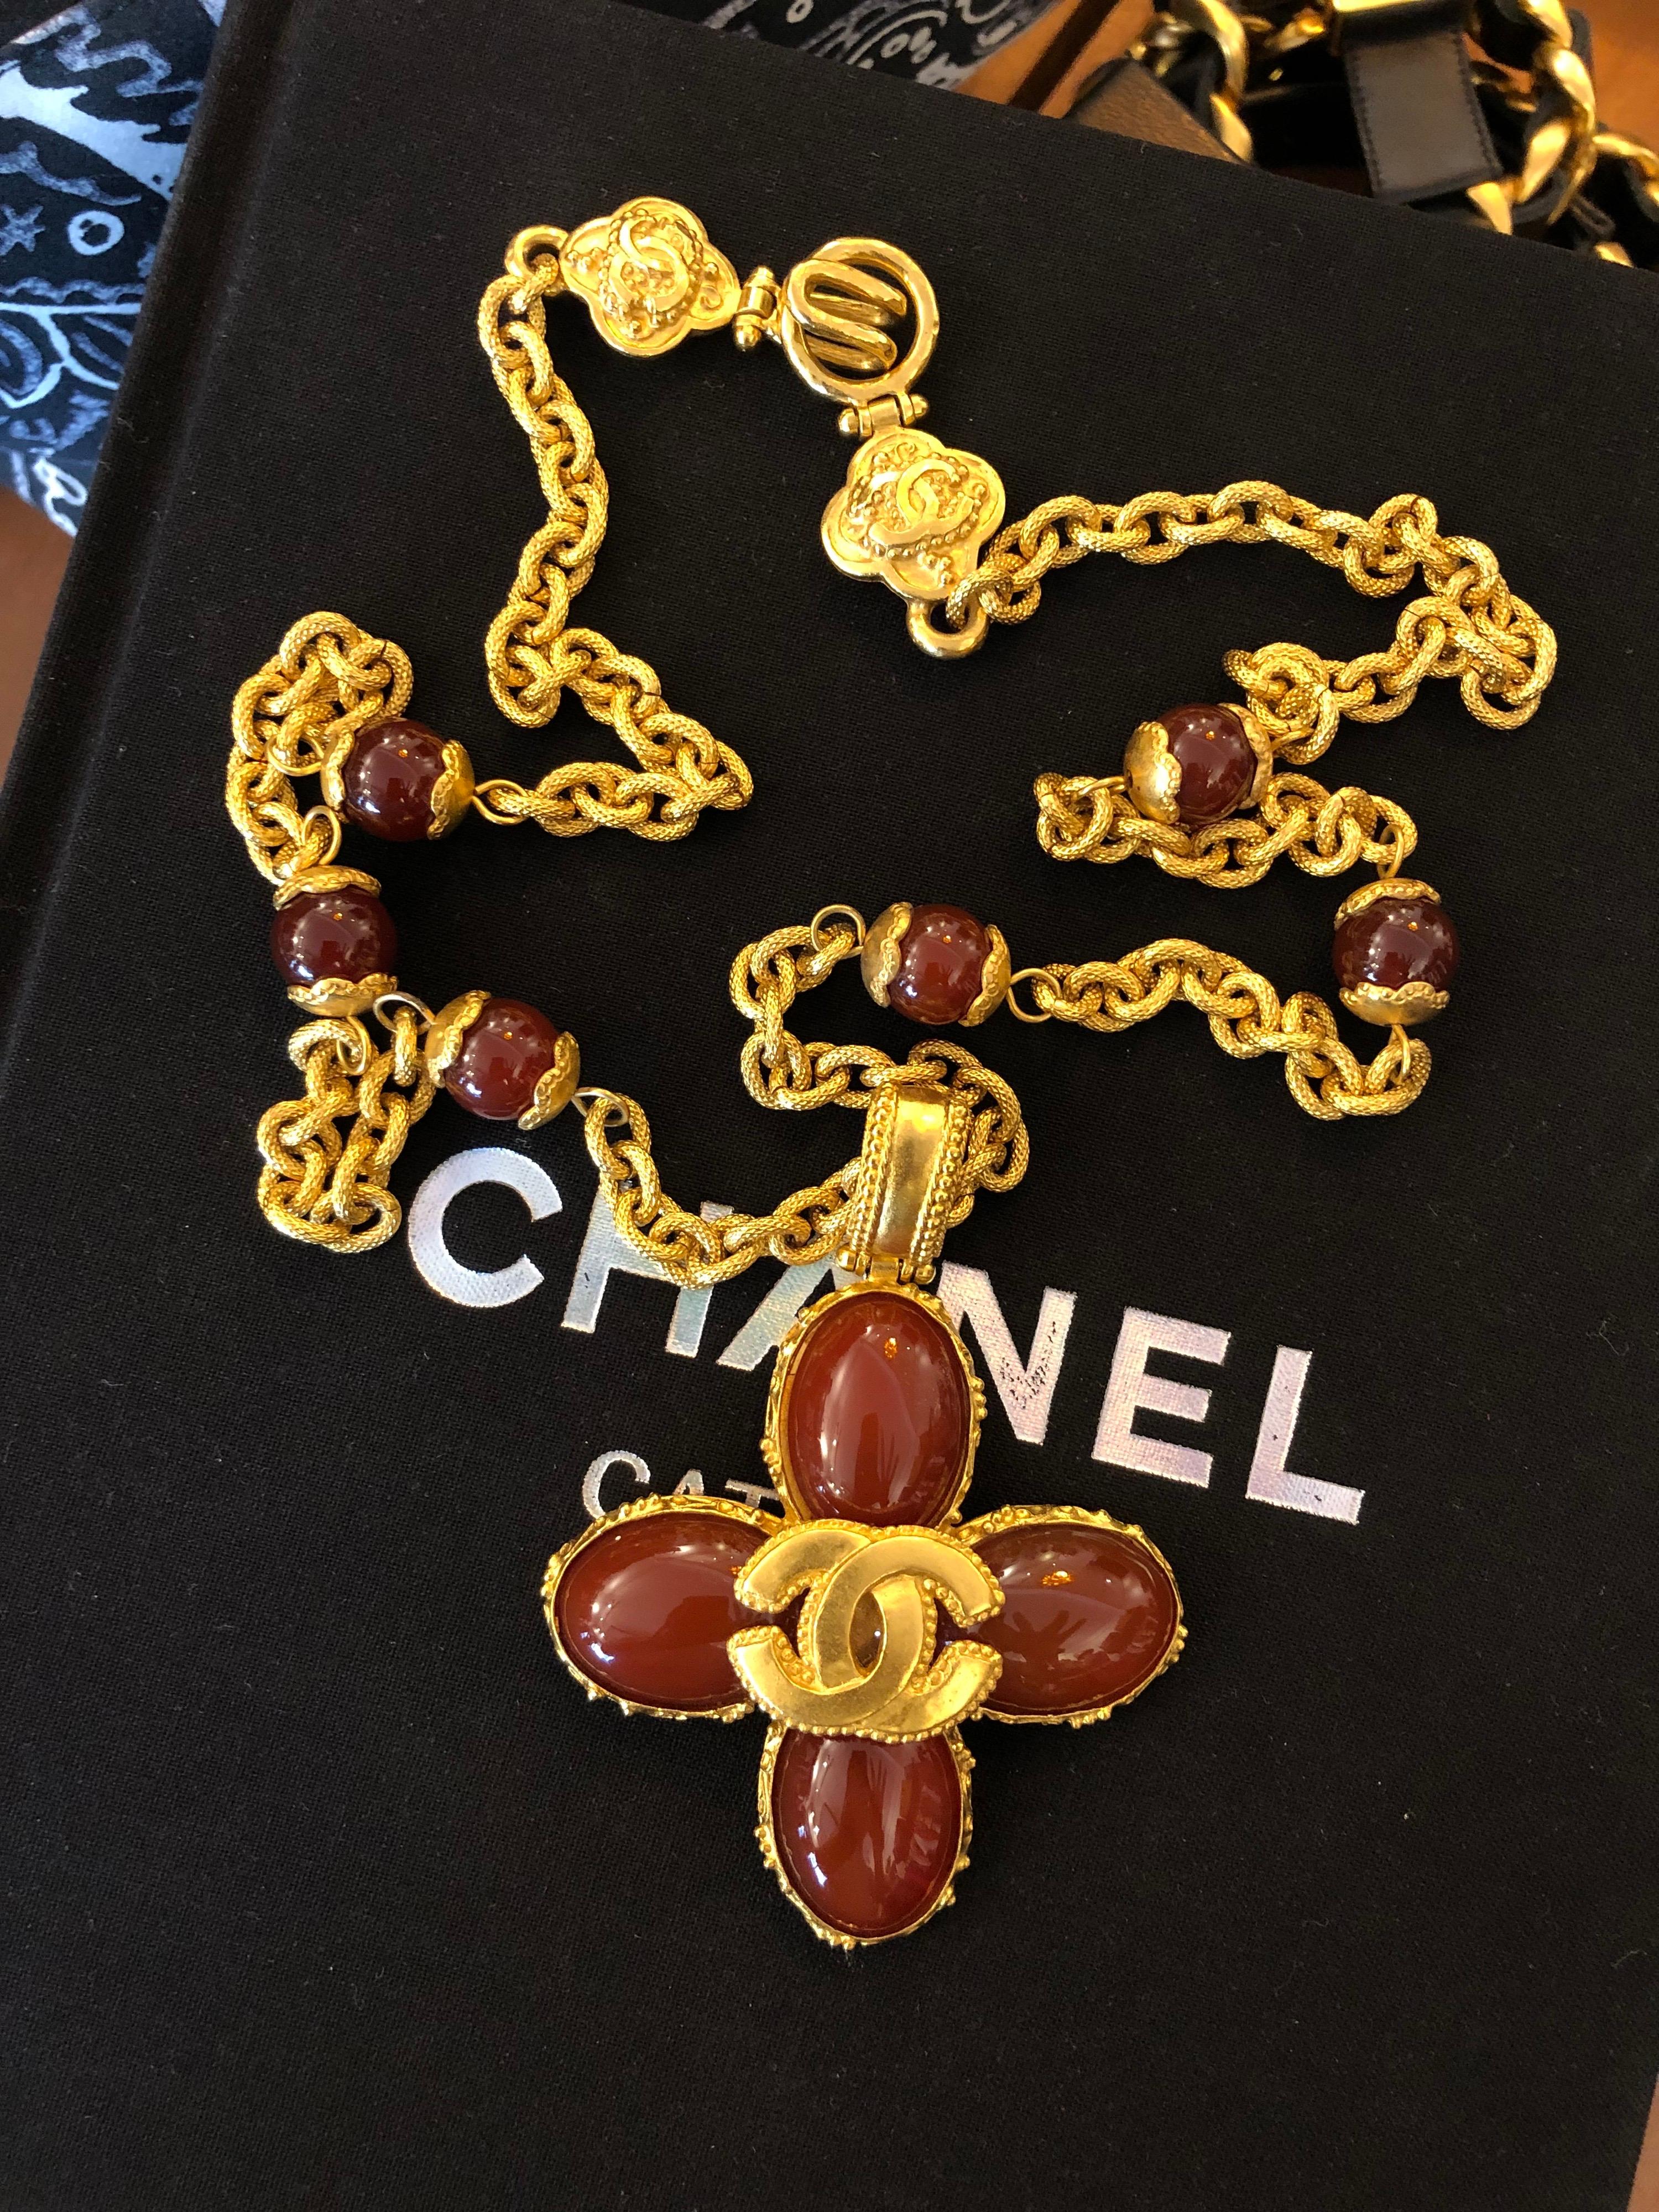 1990s Chanel gold toned textured chain necklace adorned with six semi-precious red carnelian stone beads and a gold toned CC logo mounted on an iconic Chanel clover charm in semi-precious red carnelian stone. Exquisitely crafted from the hooks to